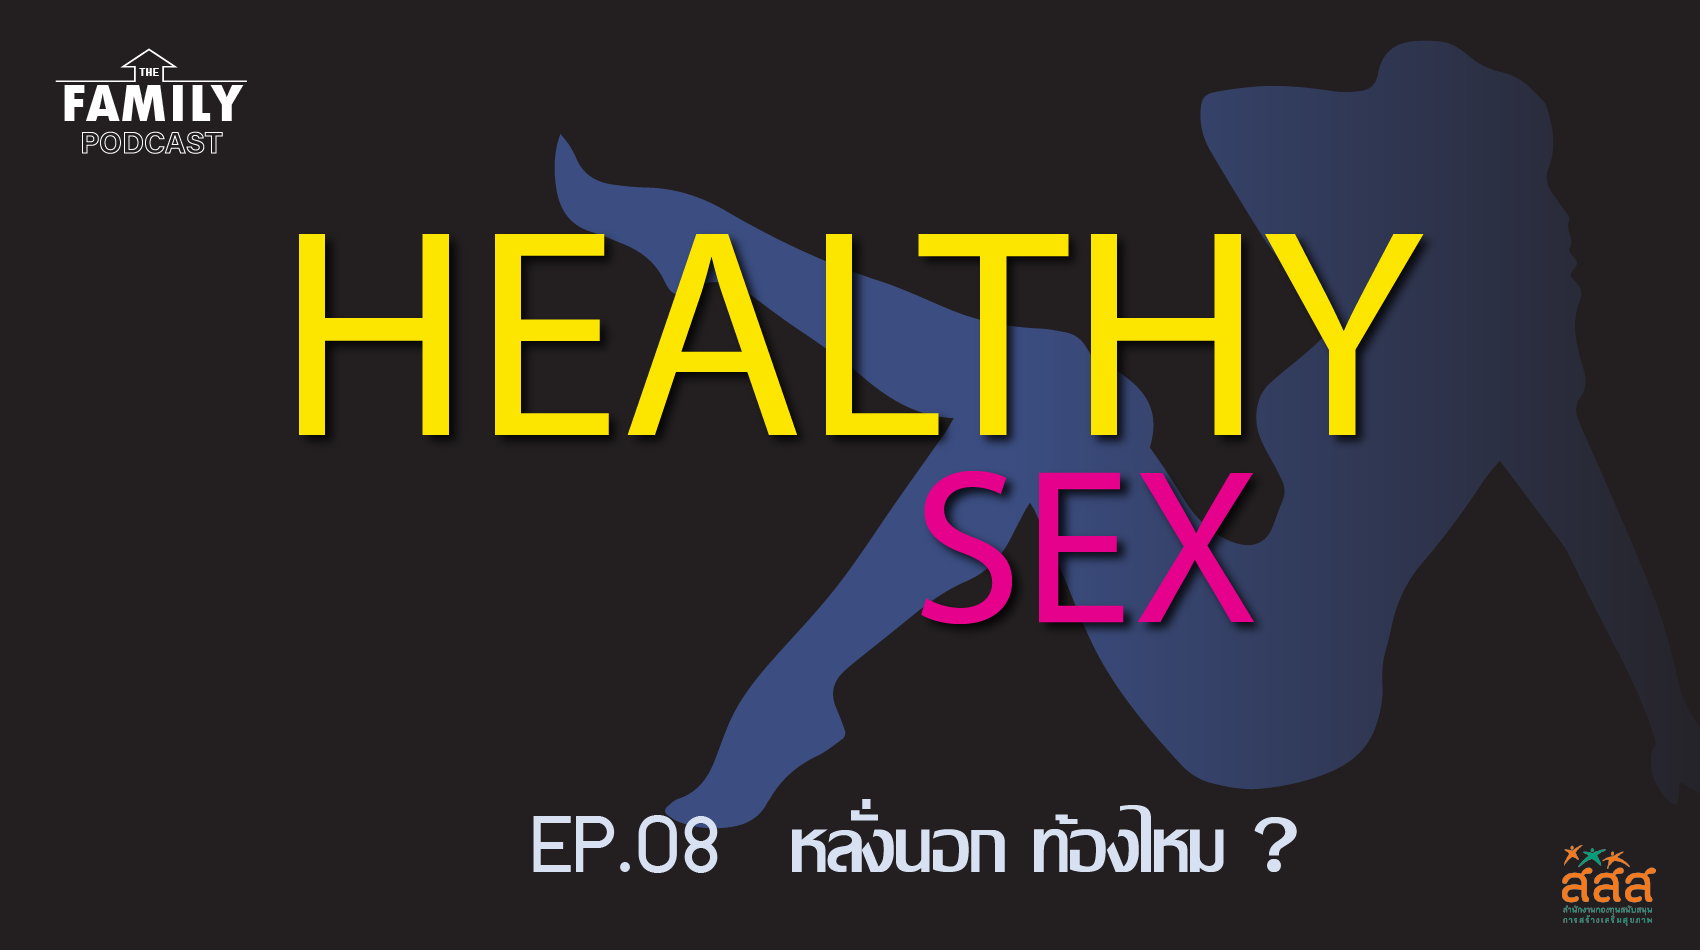 The Family Podcast Healthy Sex EP.08 หลั่งนอกท้องไหม